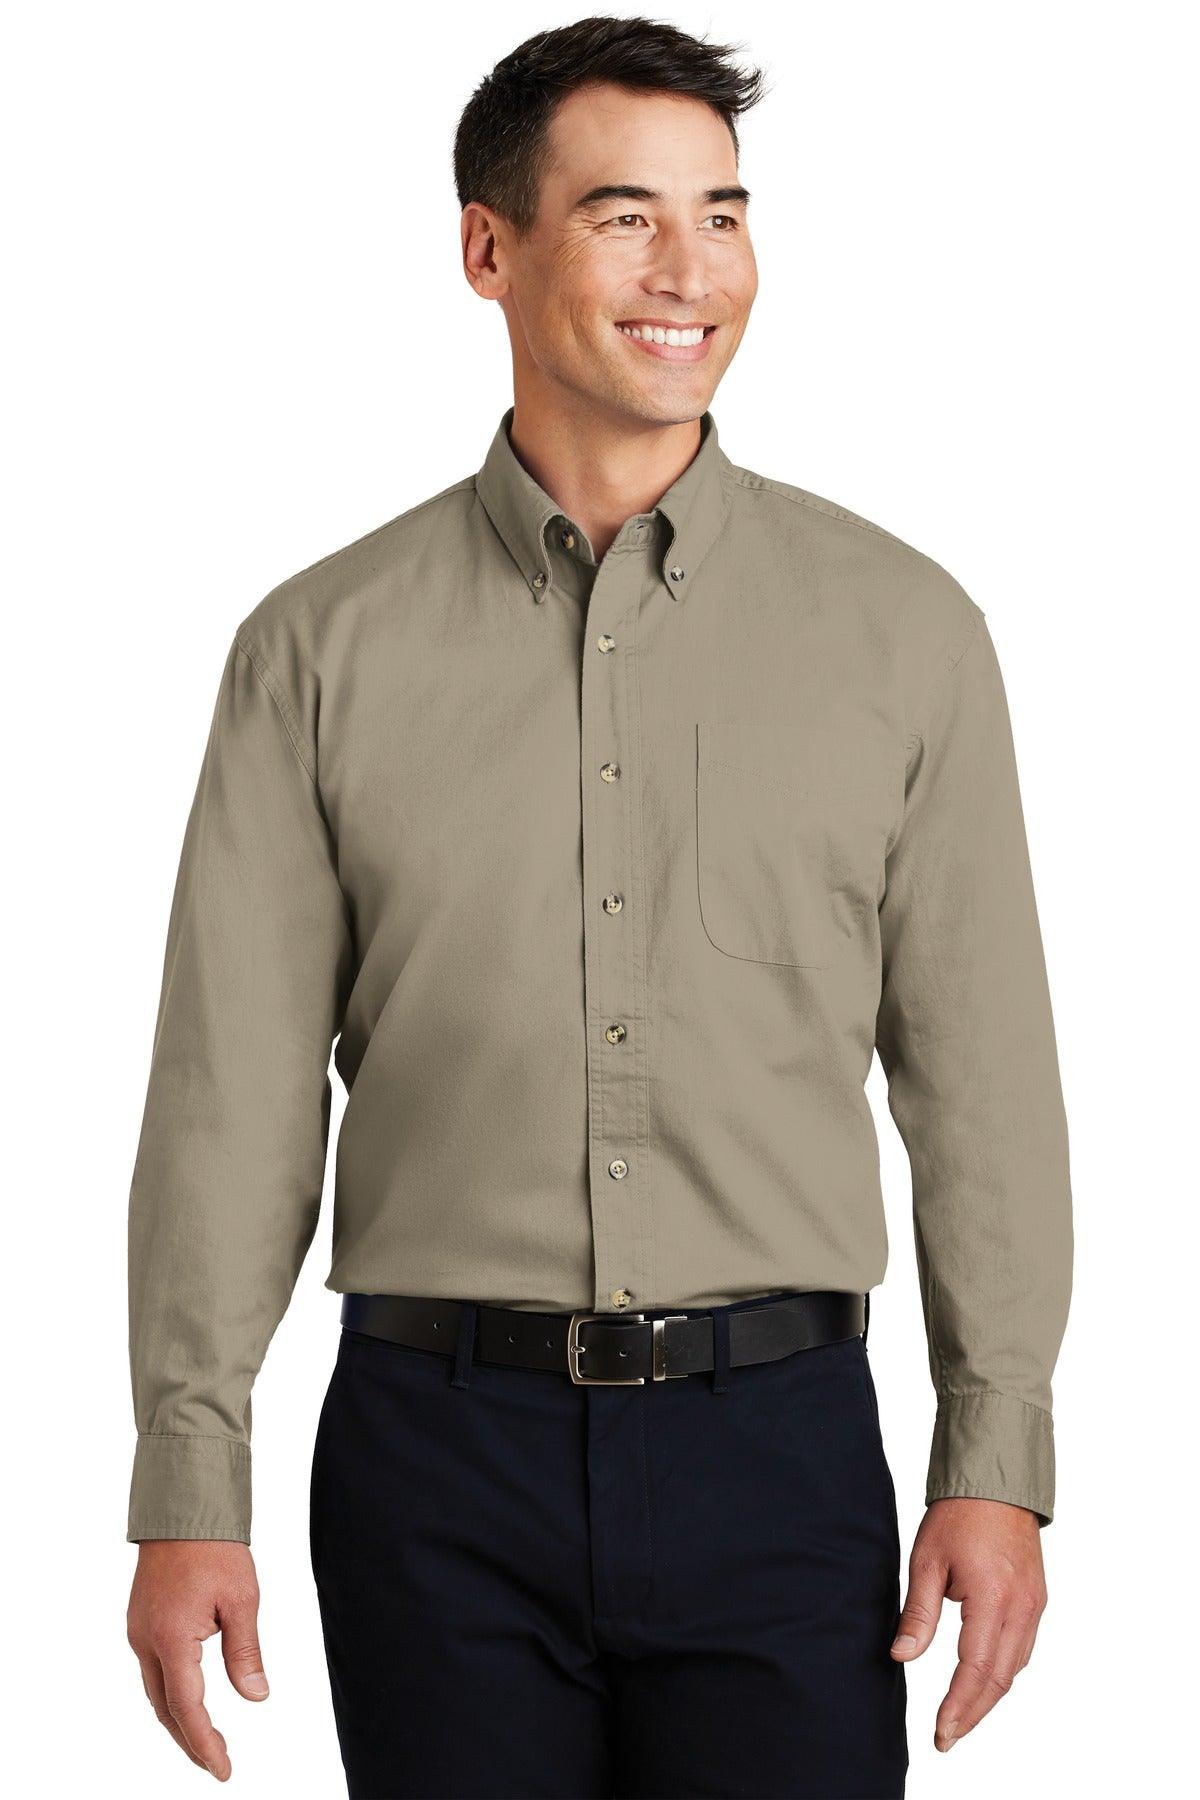 Port Authority Long Sleeve Twill Shirt. S600T - Dresses Max